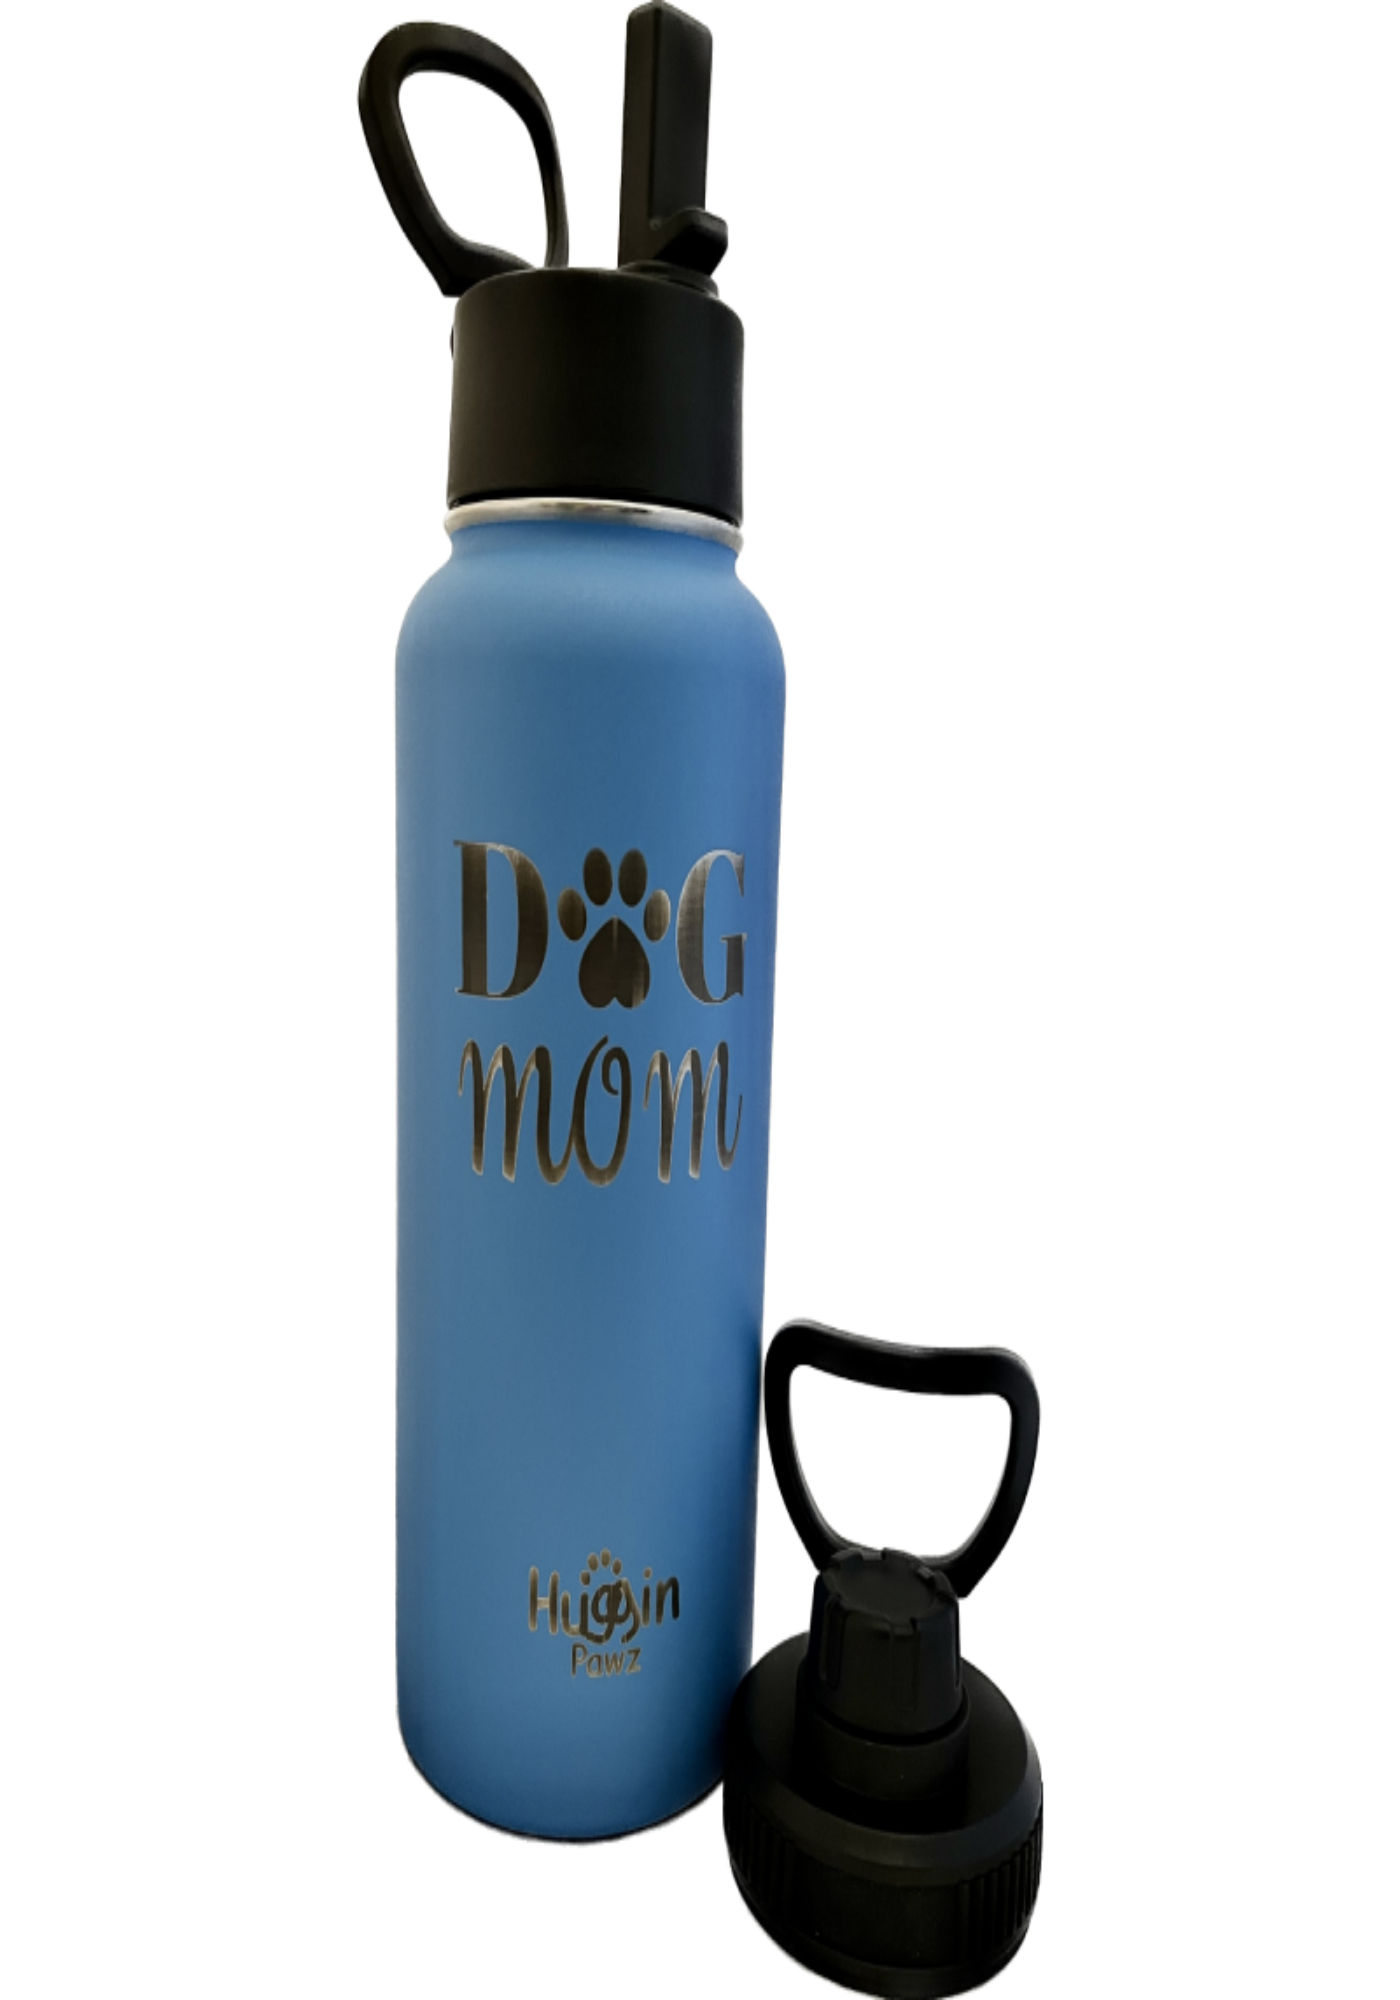 "Dog Mom" 32 oz Insulated Water Bottle